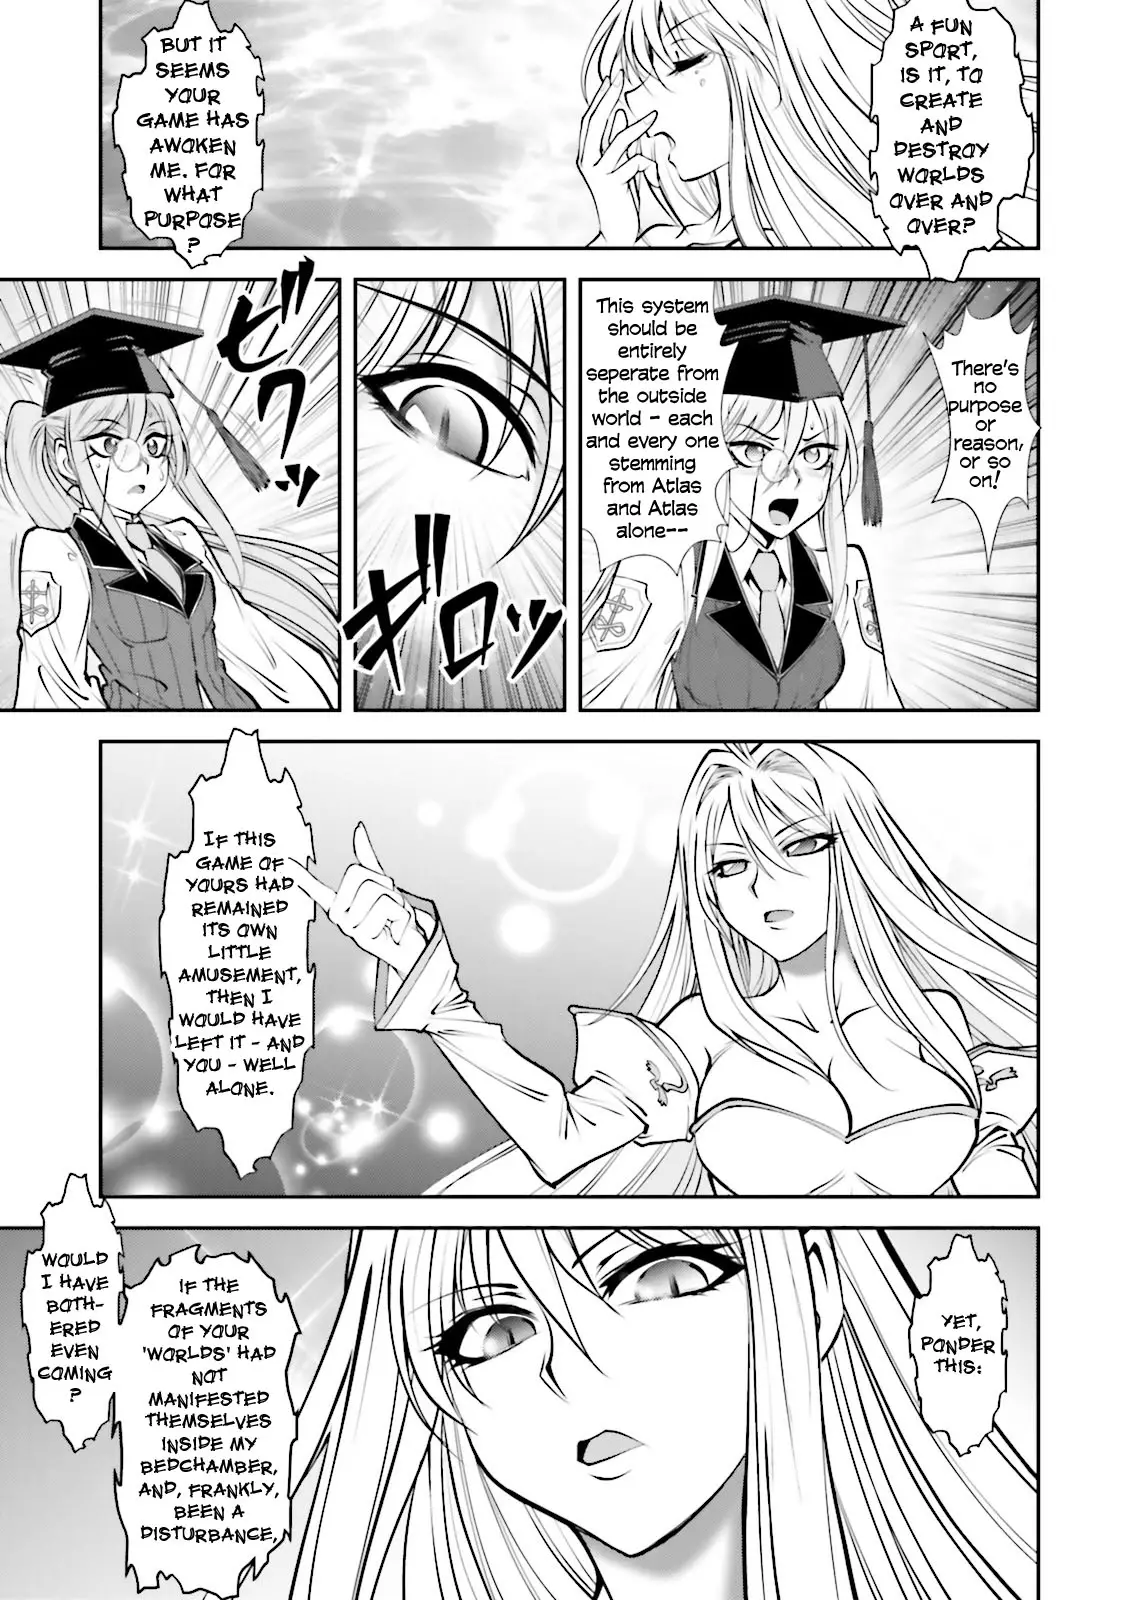 Melty Blood - Back Alley Alliance Nightmare - 8 page 3